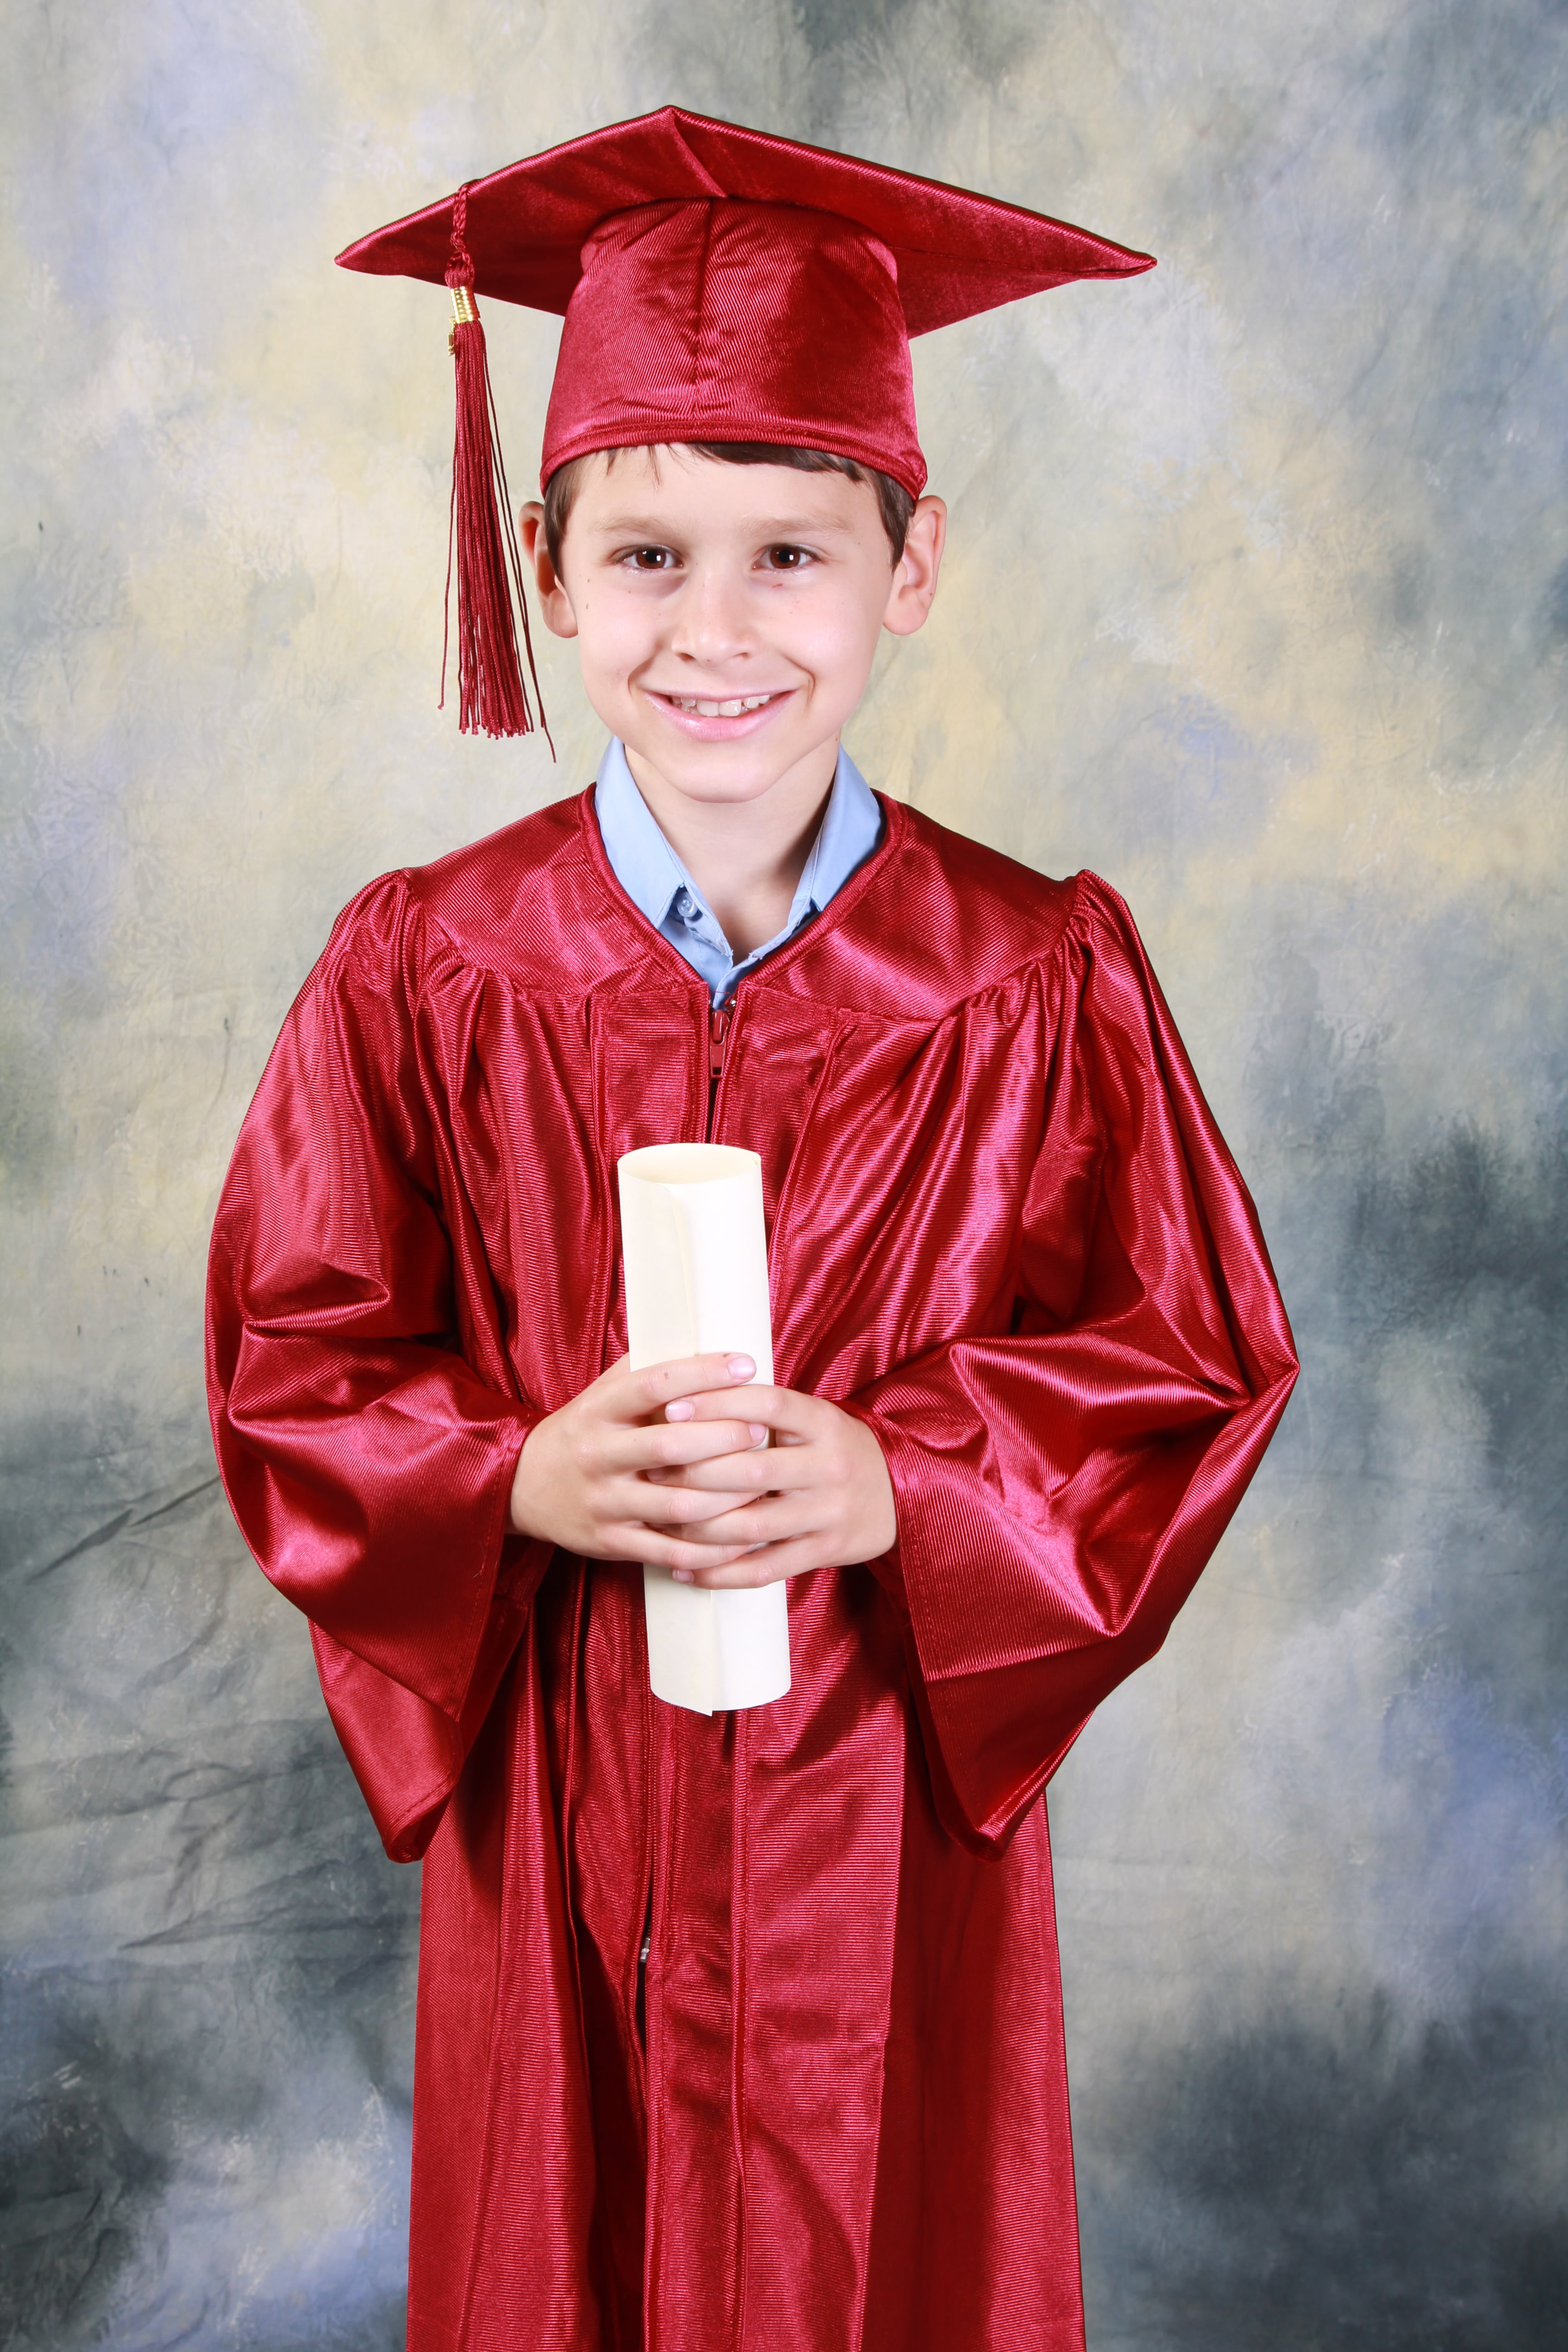 Graduation Gown And Cap On A Wooden Floor Background Wallpaper Image For  Free Download - Pngtree